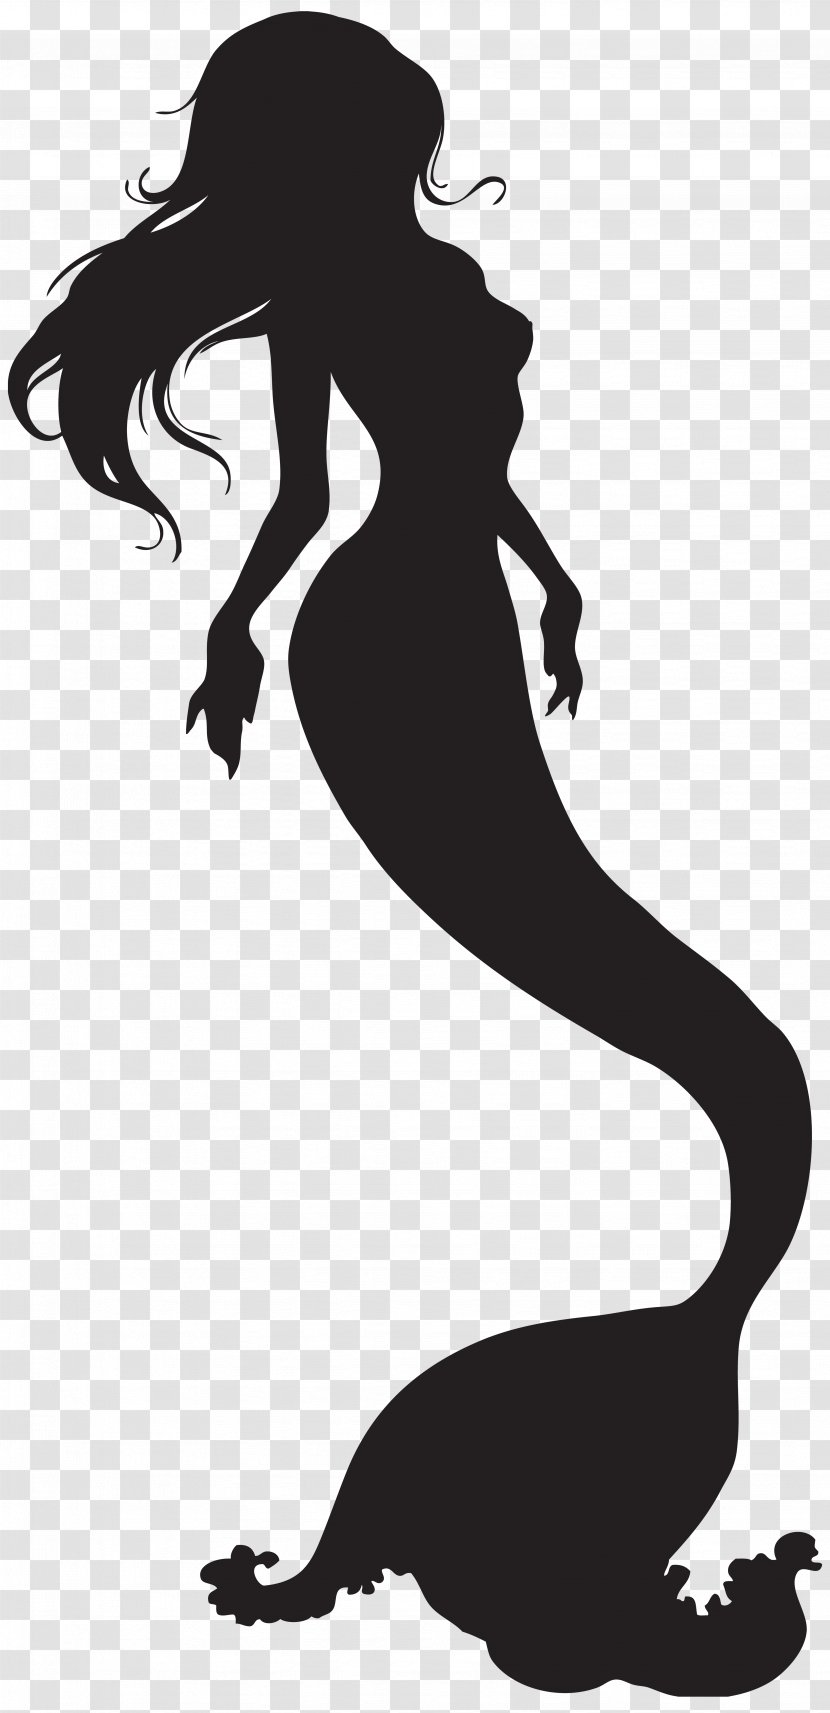 Mermaid - Black And White - Silhouette Clip Art Image Transparent PNG